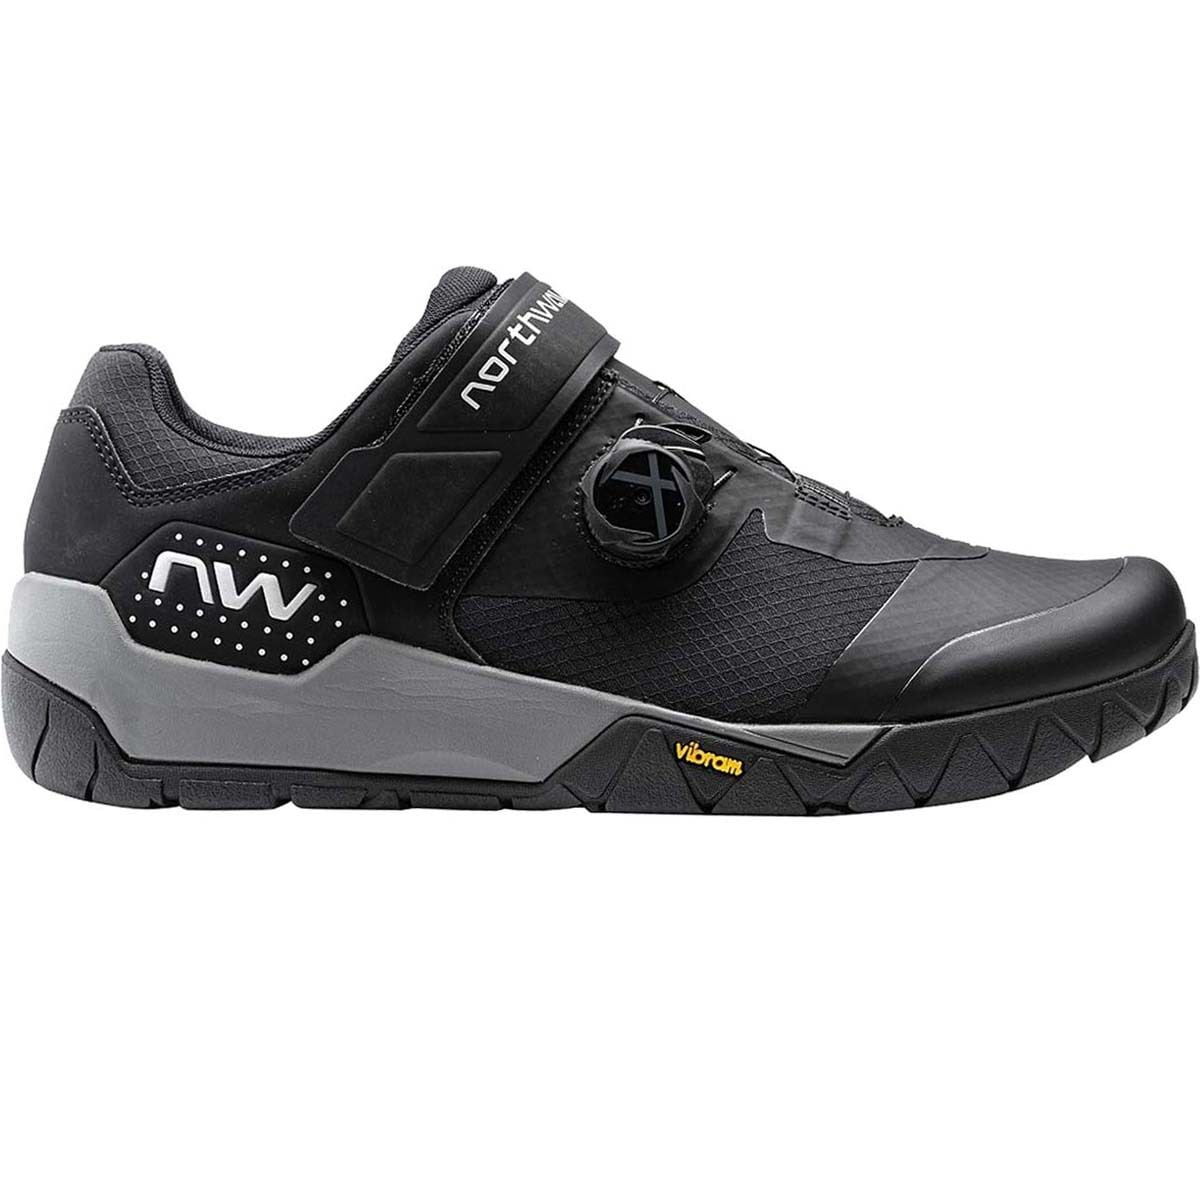 Northwave Overland Plus Cycling Shoes - Men's